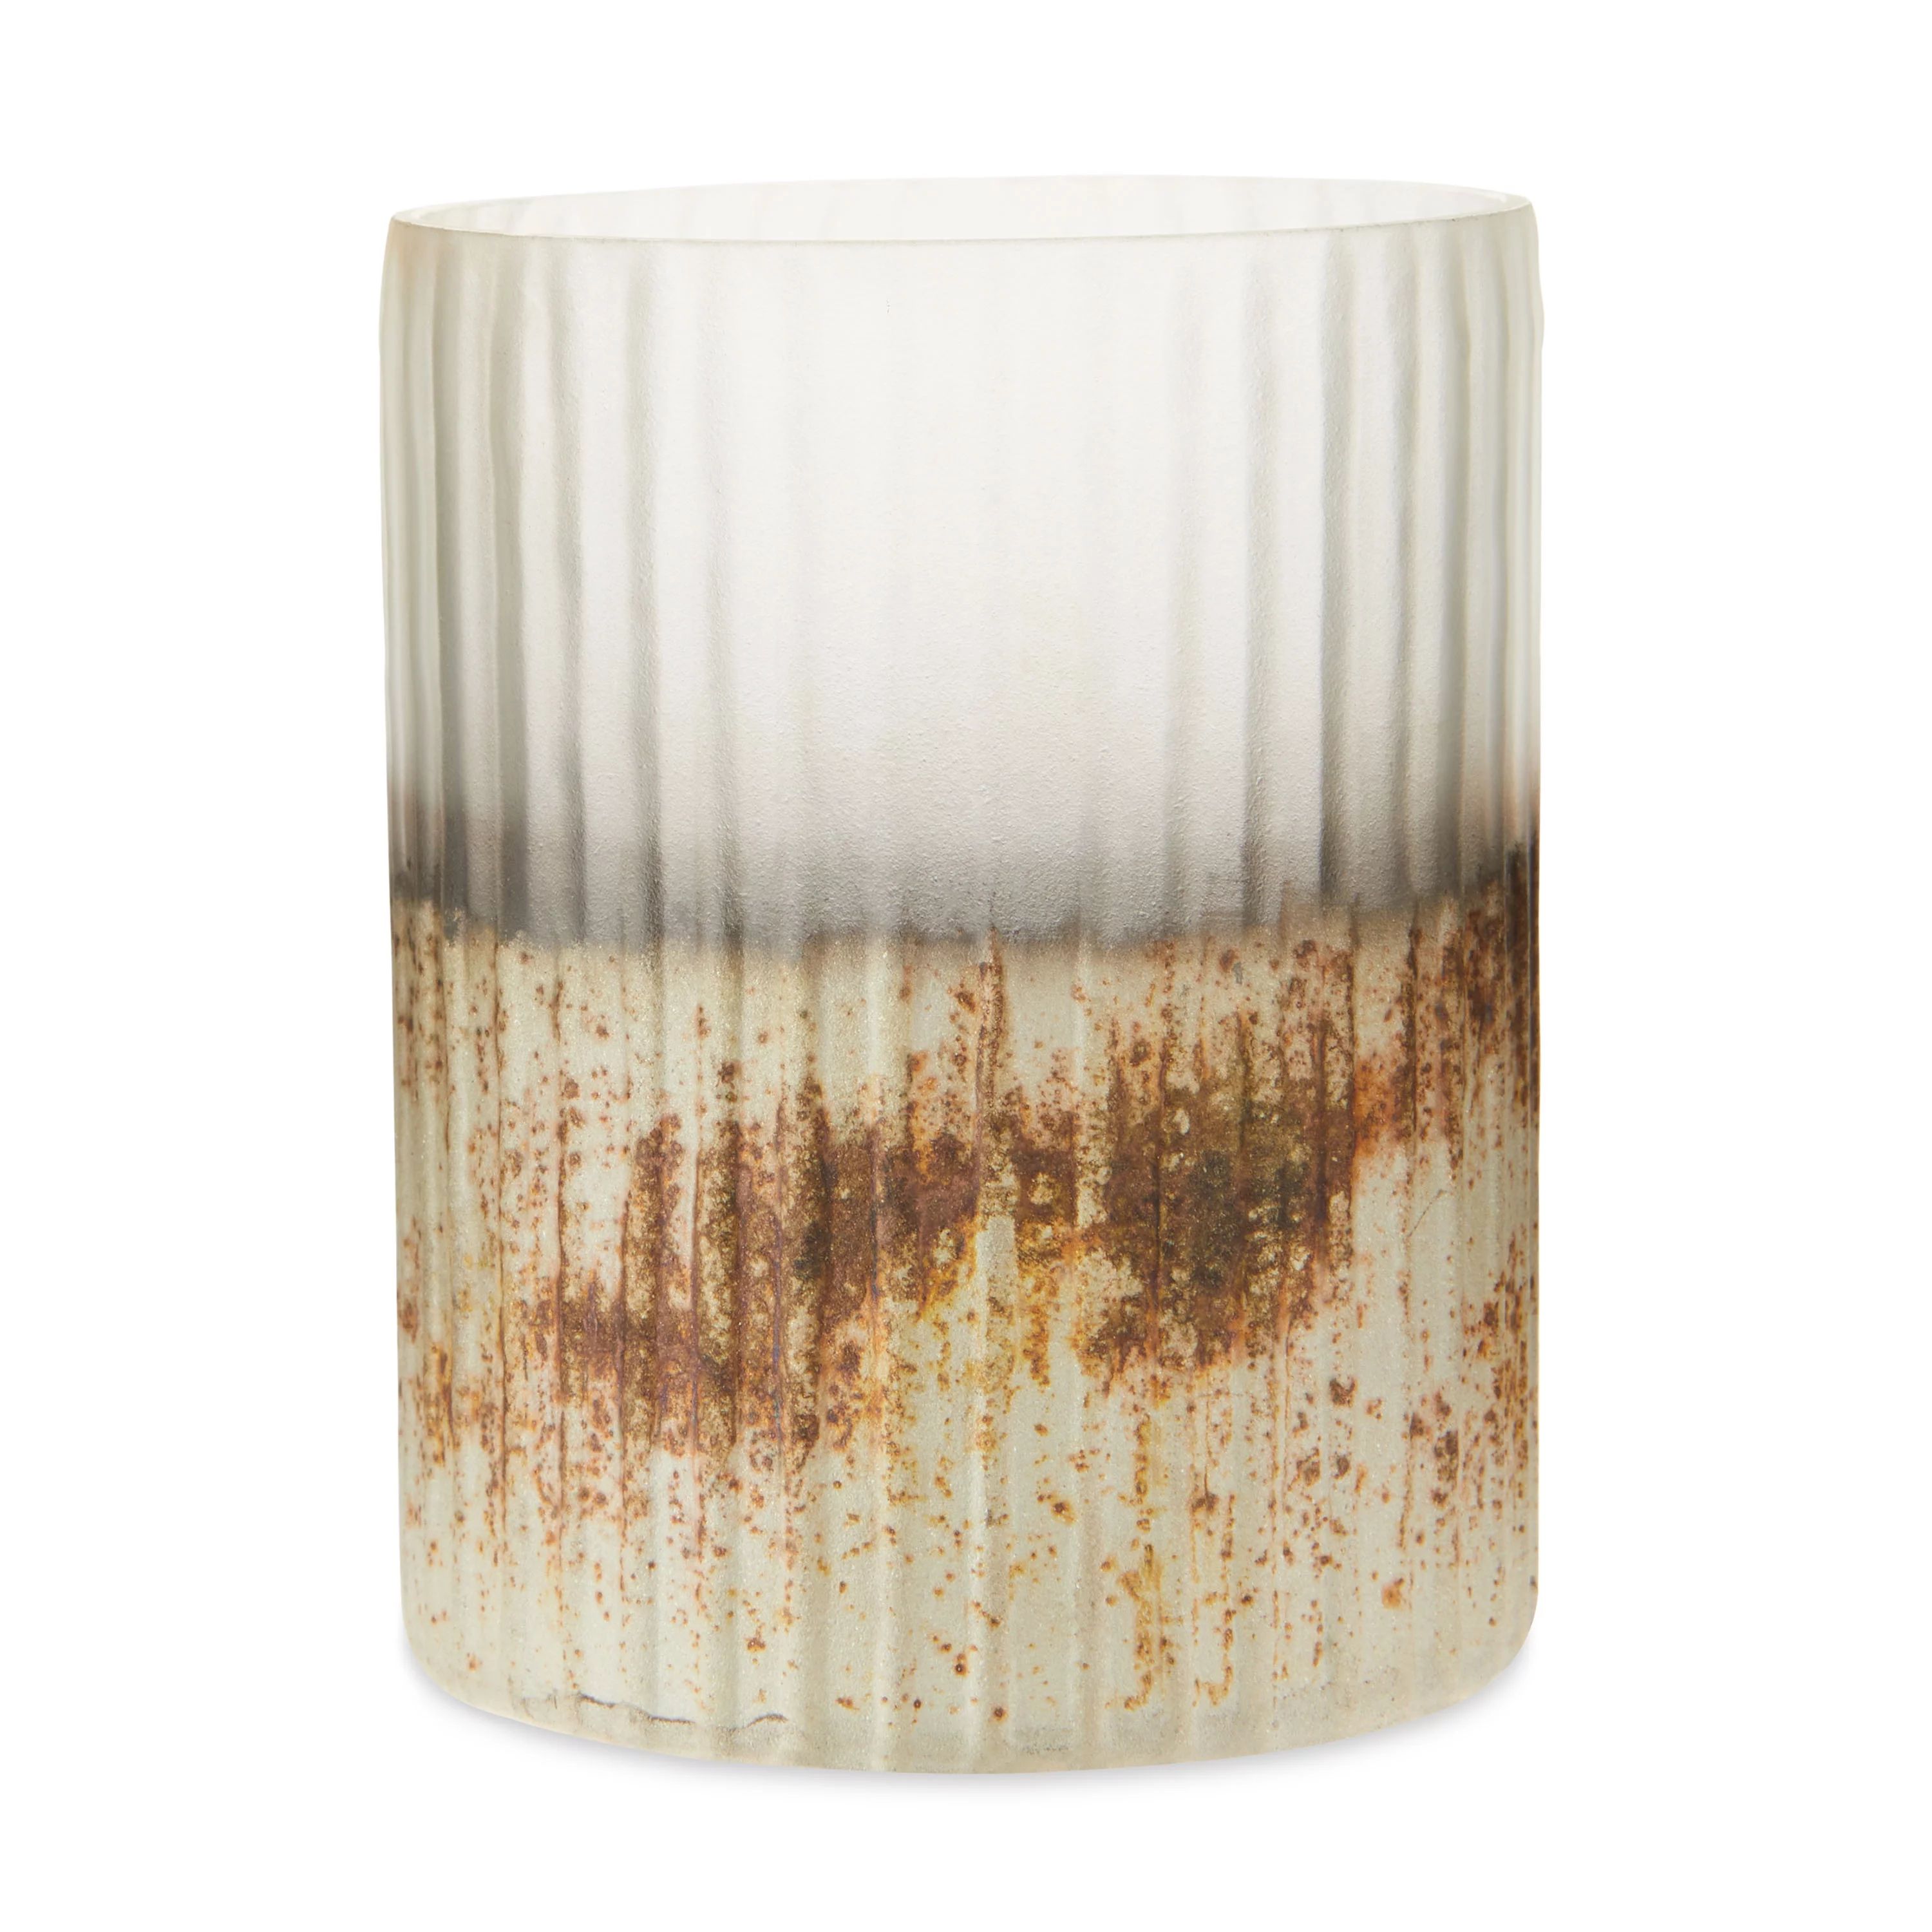 White & Gold Ombre Glass Votive Holder, 4", by Holiday Time | Walmart (US)